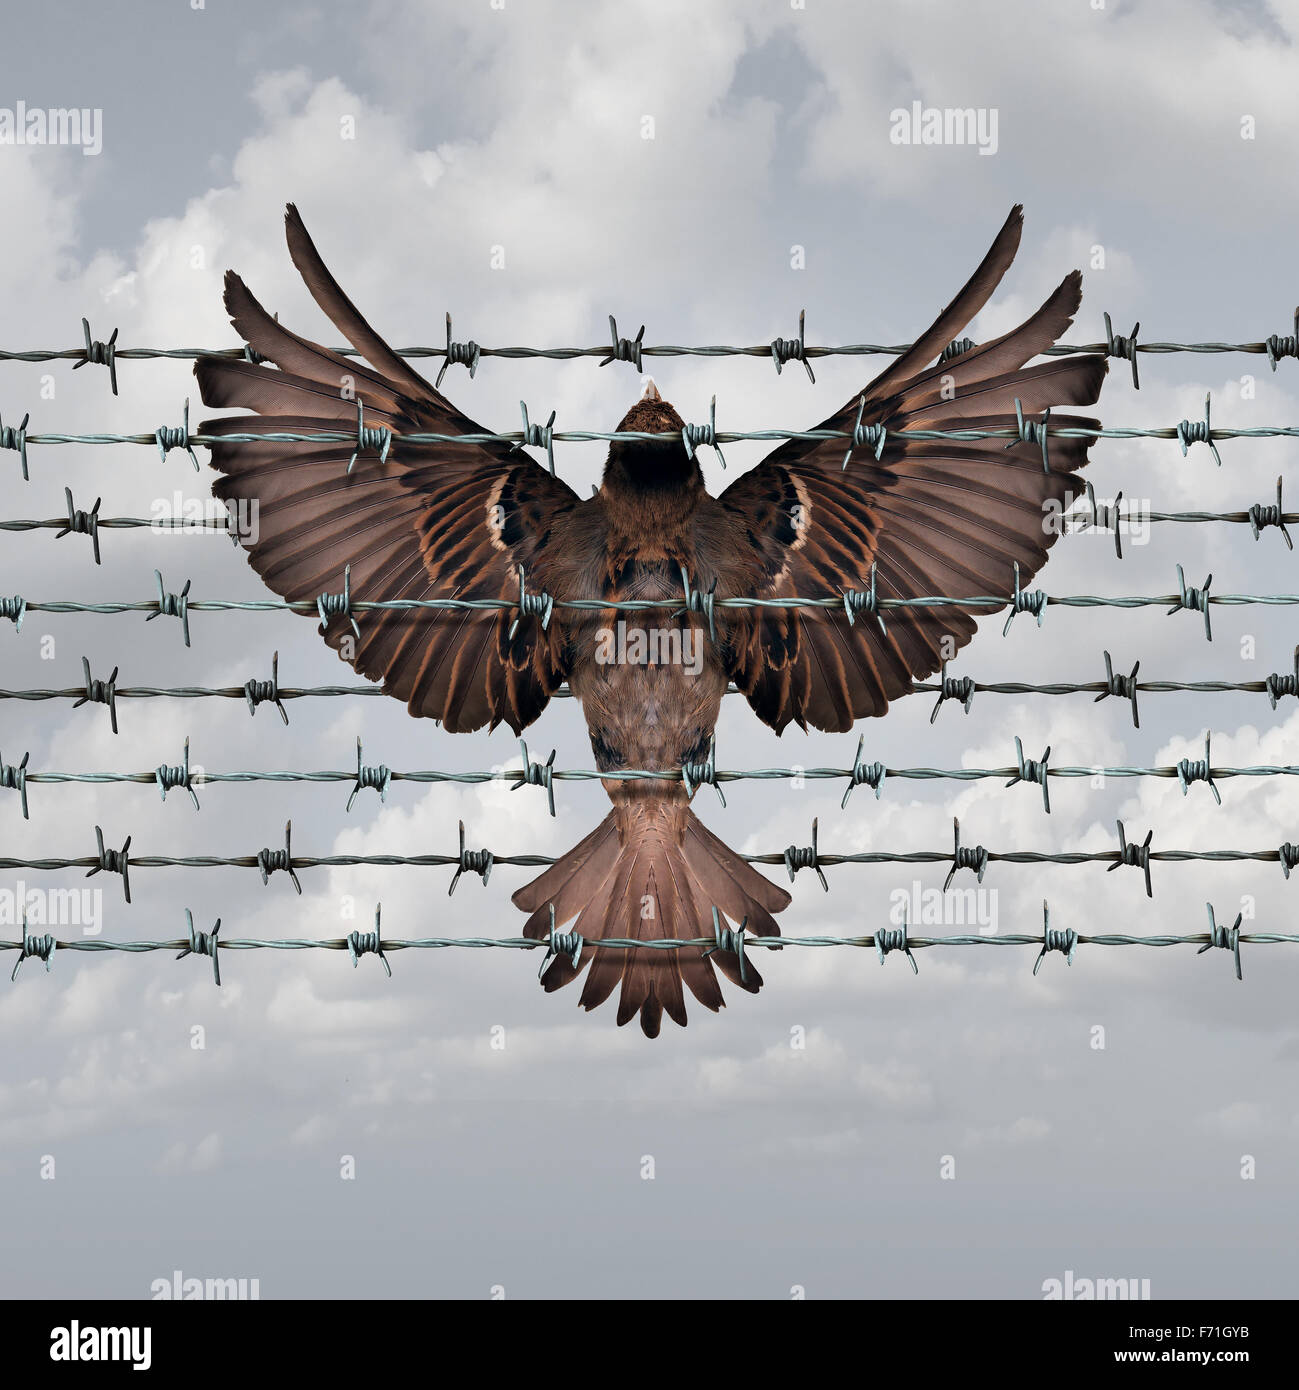 Restricted freedom concept and constrained opportunity symbol as a bird caught and entangled in a barbed wire fence as an icon for frustration and suppression. Stock Photo